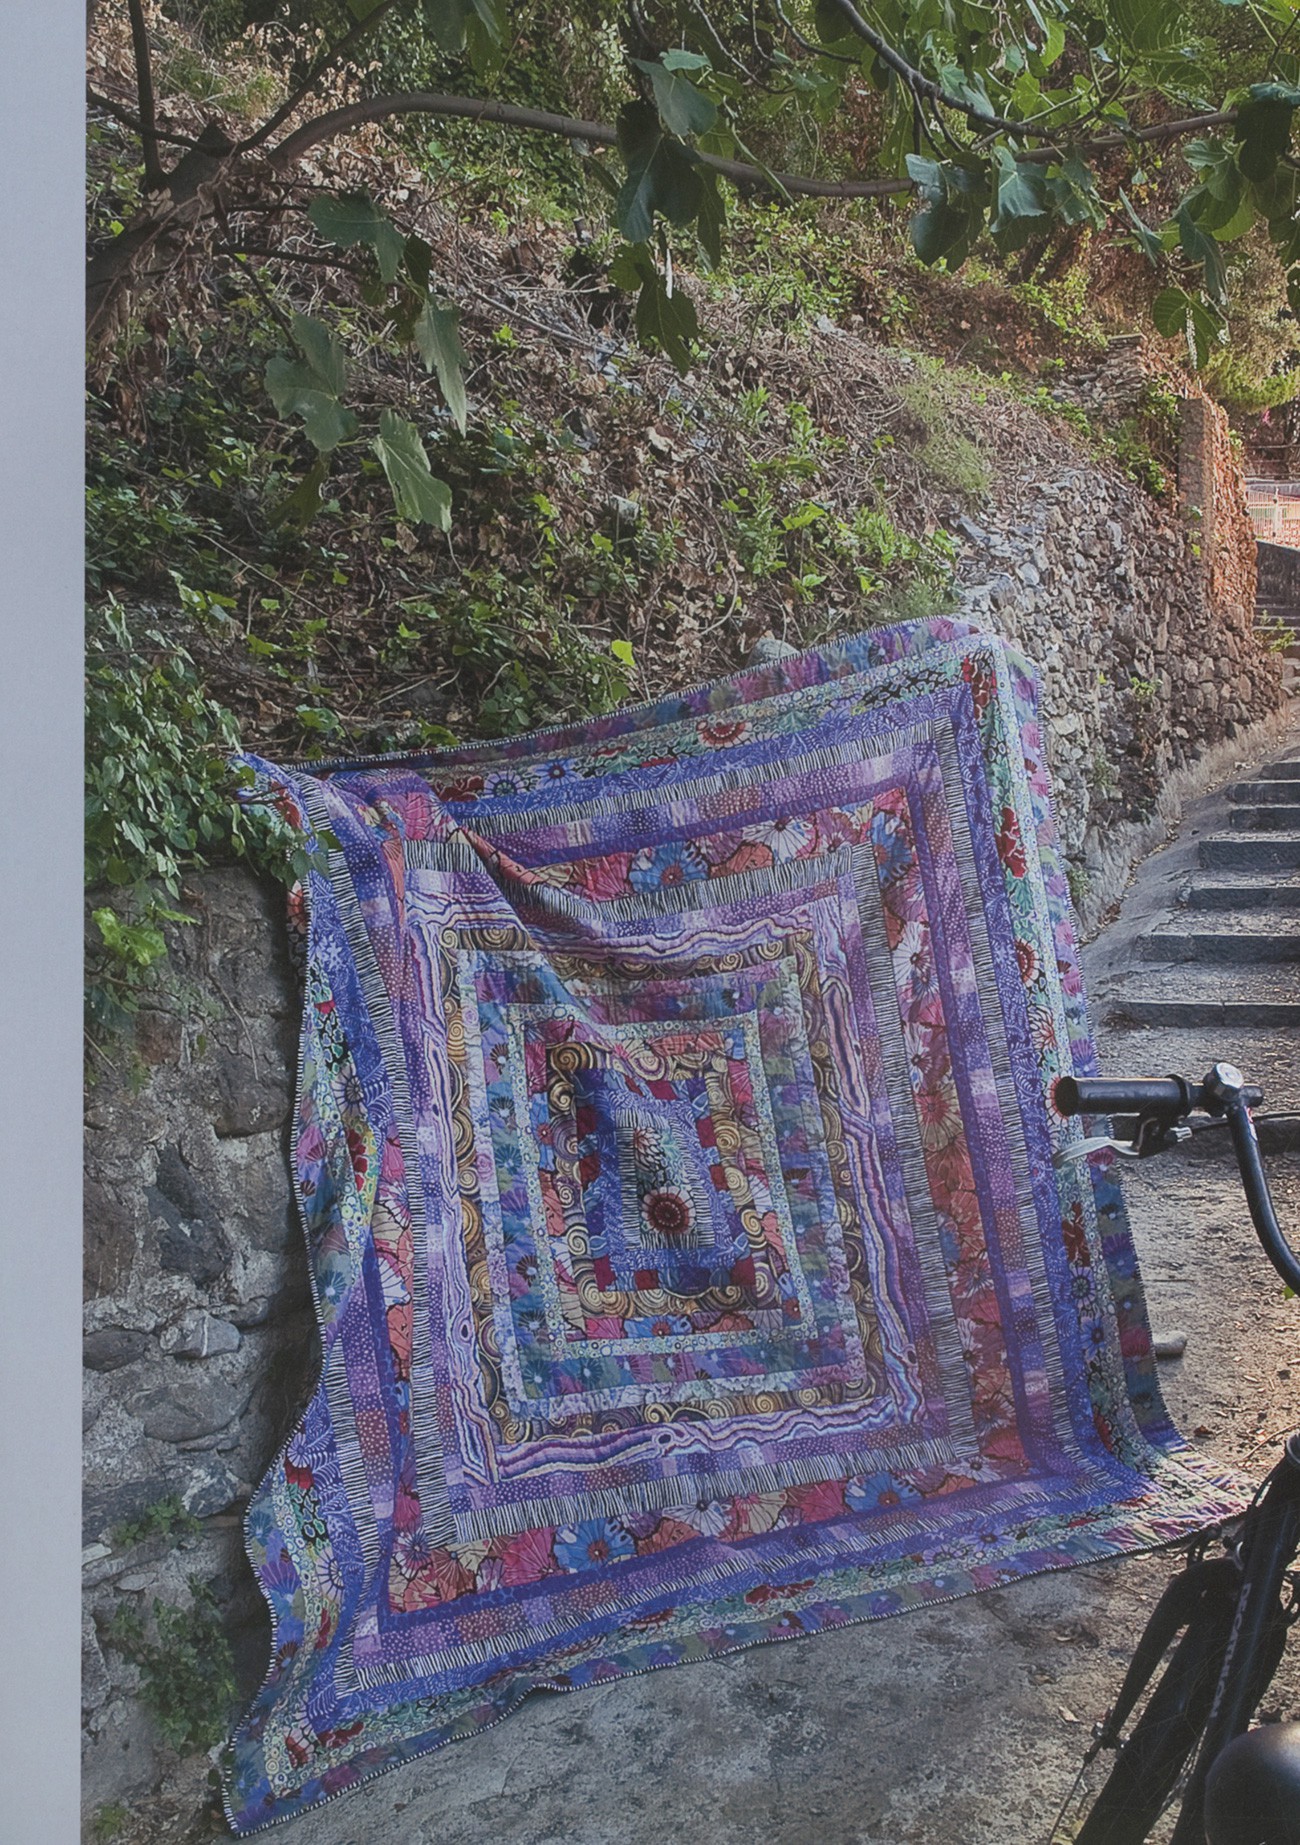 Kaffe Fassett's book Quilts in Italy series: Losing My Marbles